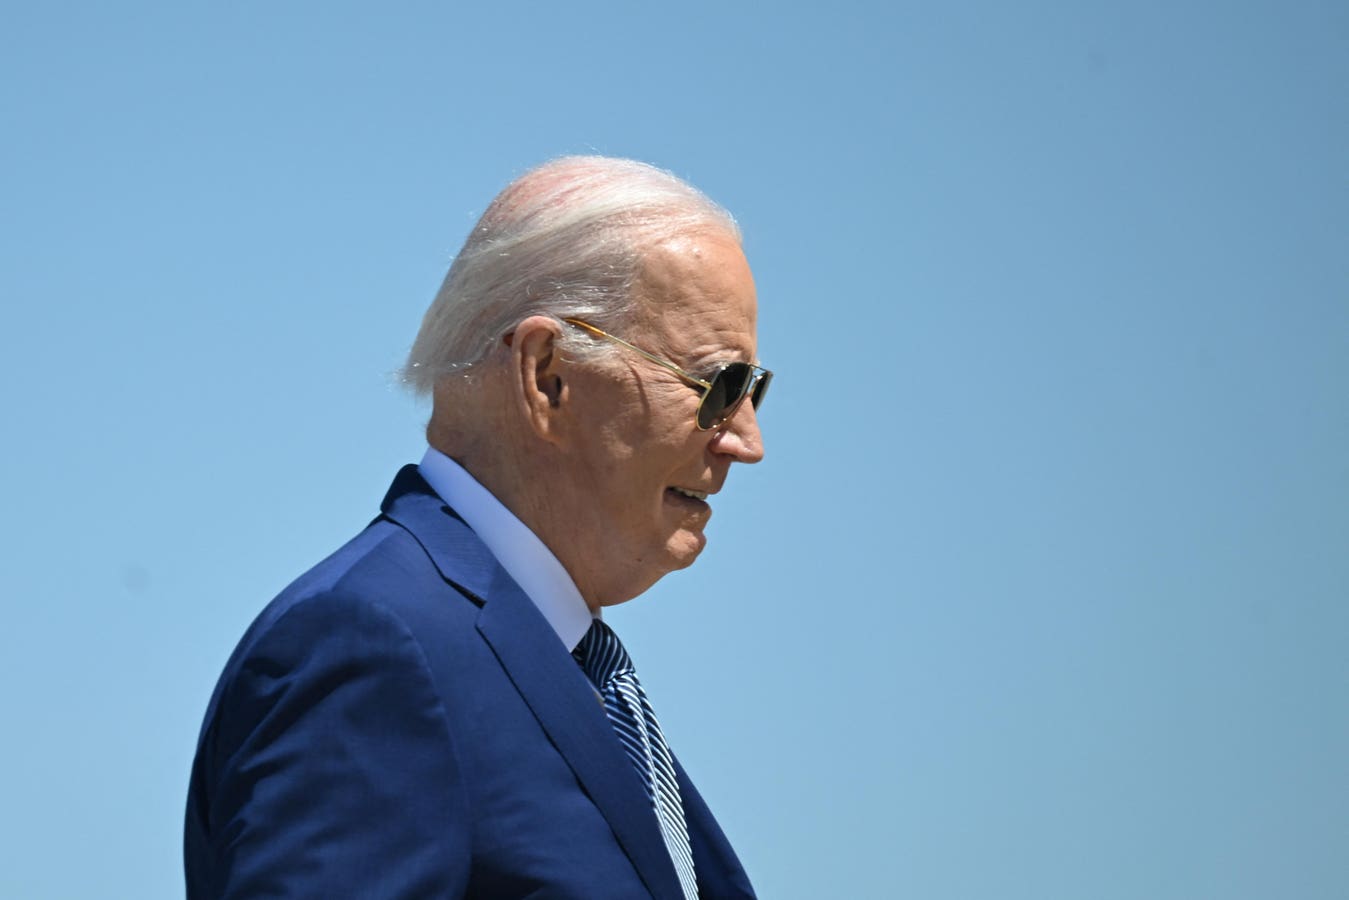 Biden Vs. Trump 2024 Election Polls: Biden Narrowly Leads Trump In Virginia, After 10-Point Win There In 2020